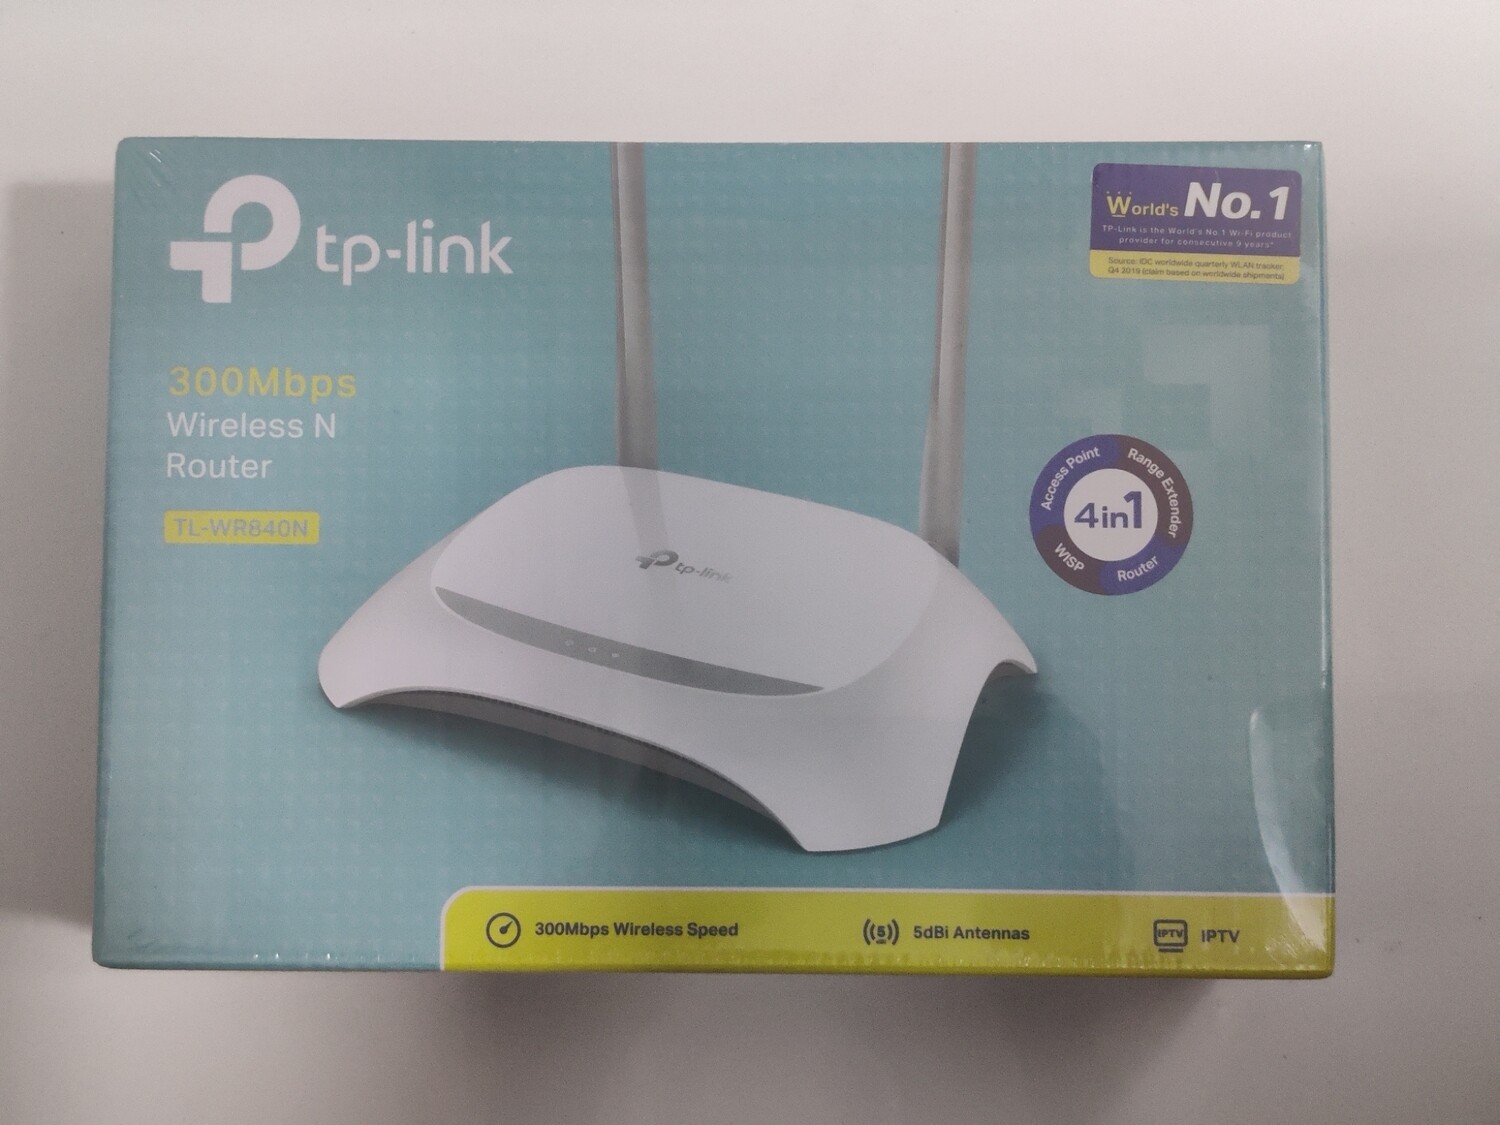 TP-Link TL-WR840N 300Mbps Wireless N Router, Rs.881